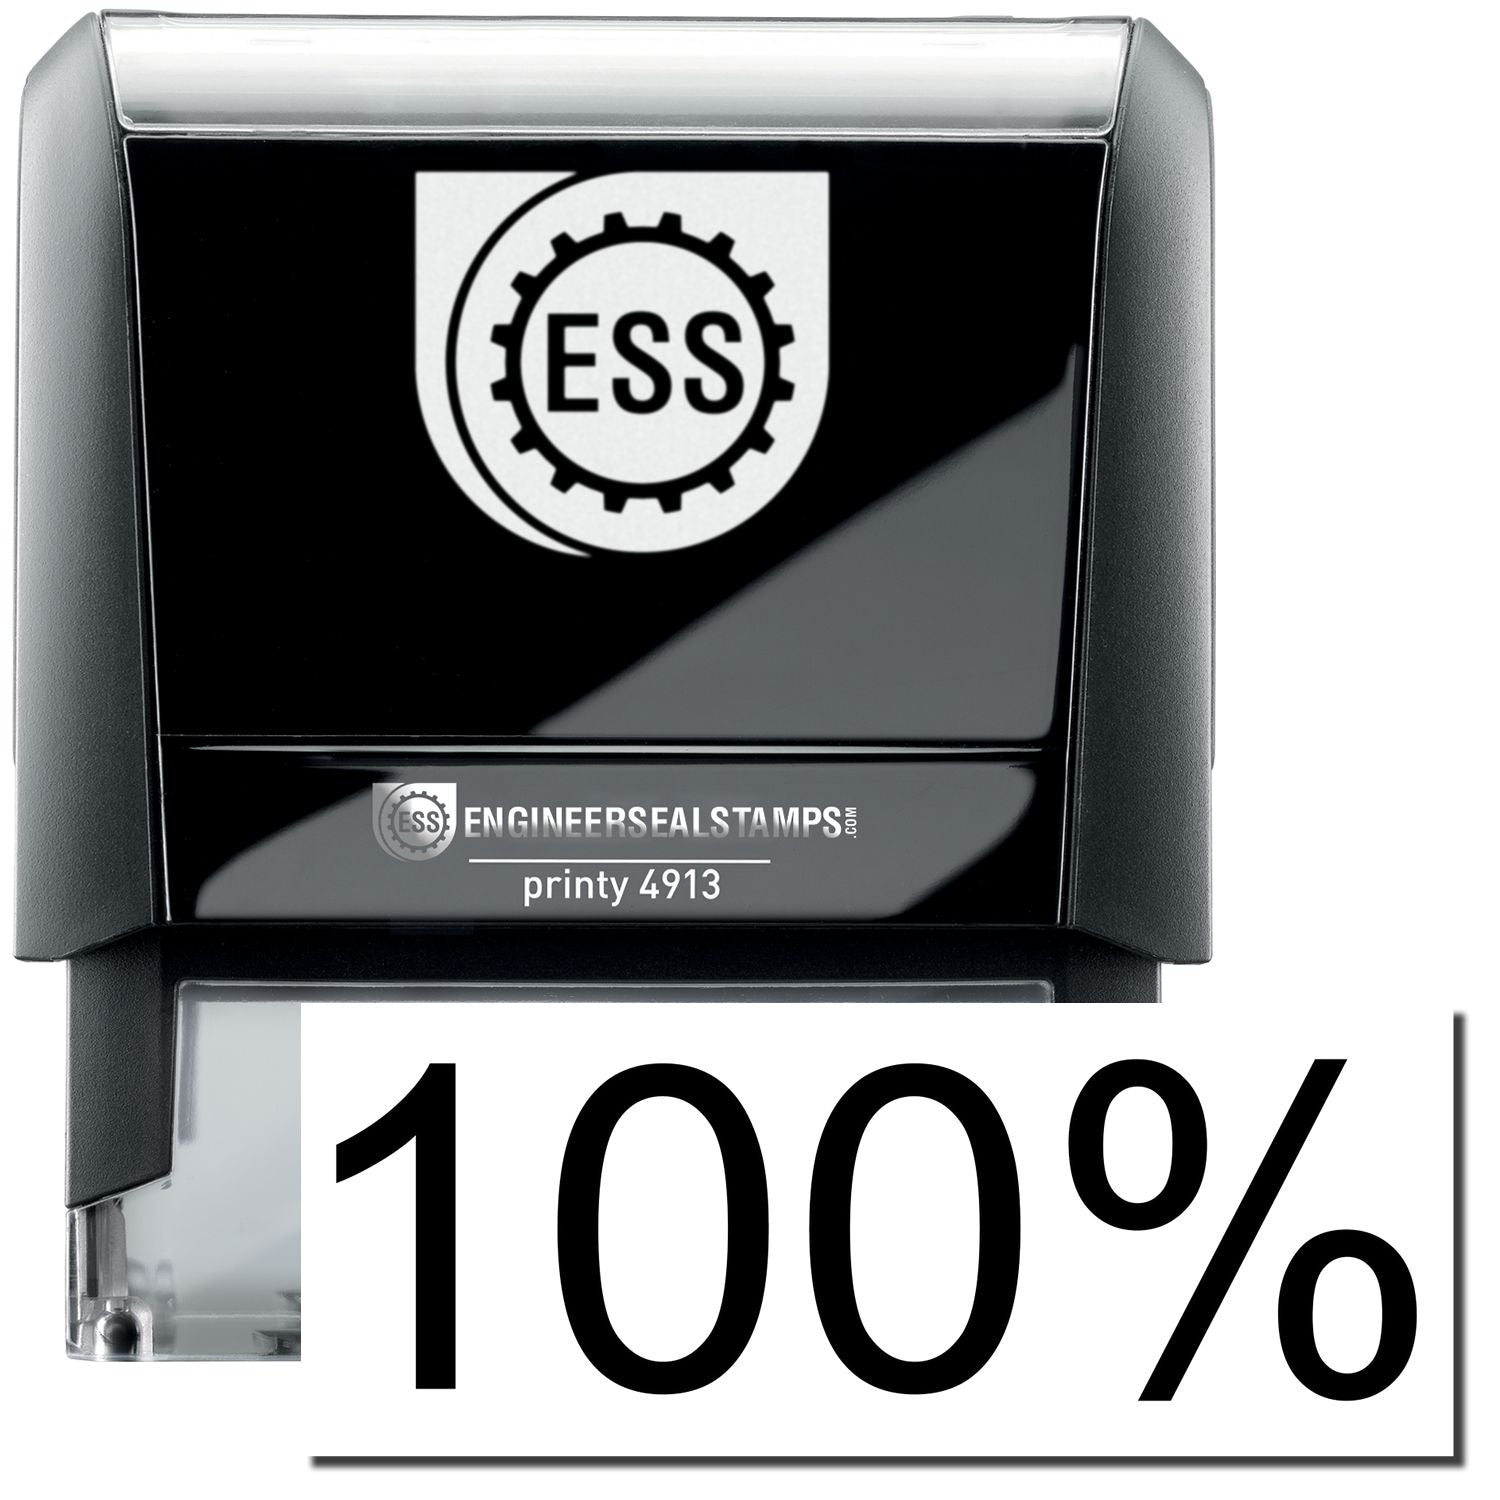 A self-inking stamp with a stamped image showing how the text "100%" in a large bold font is displayed by it after stamping.